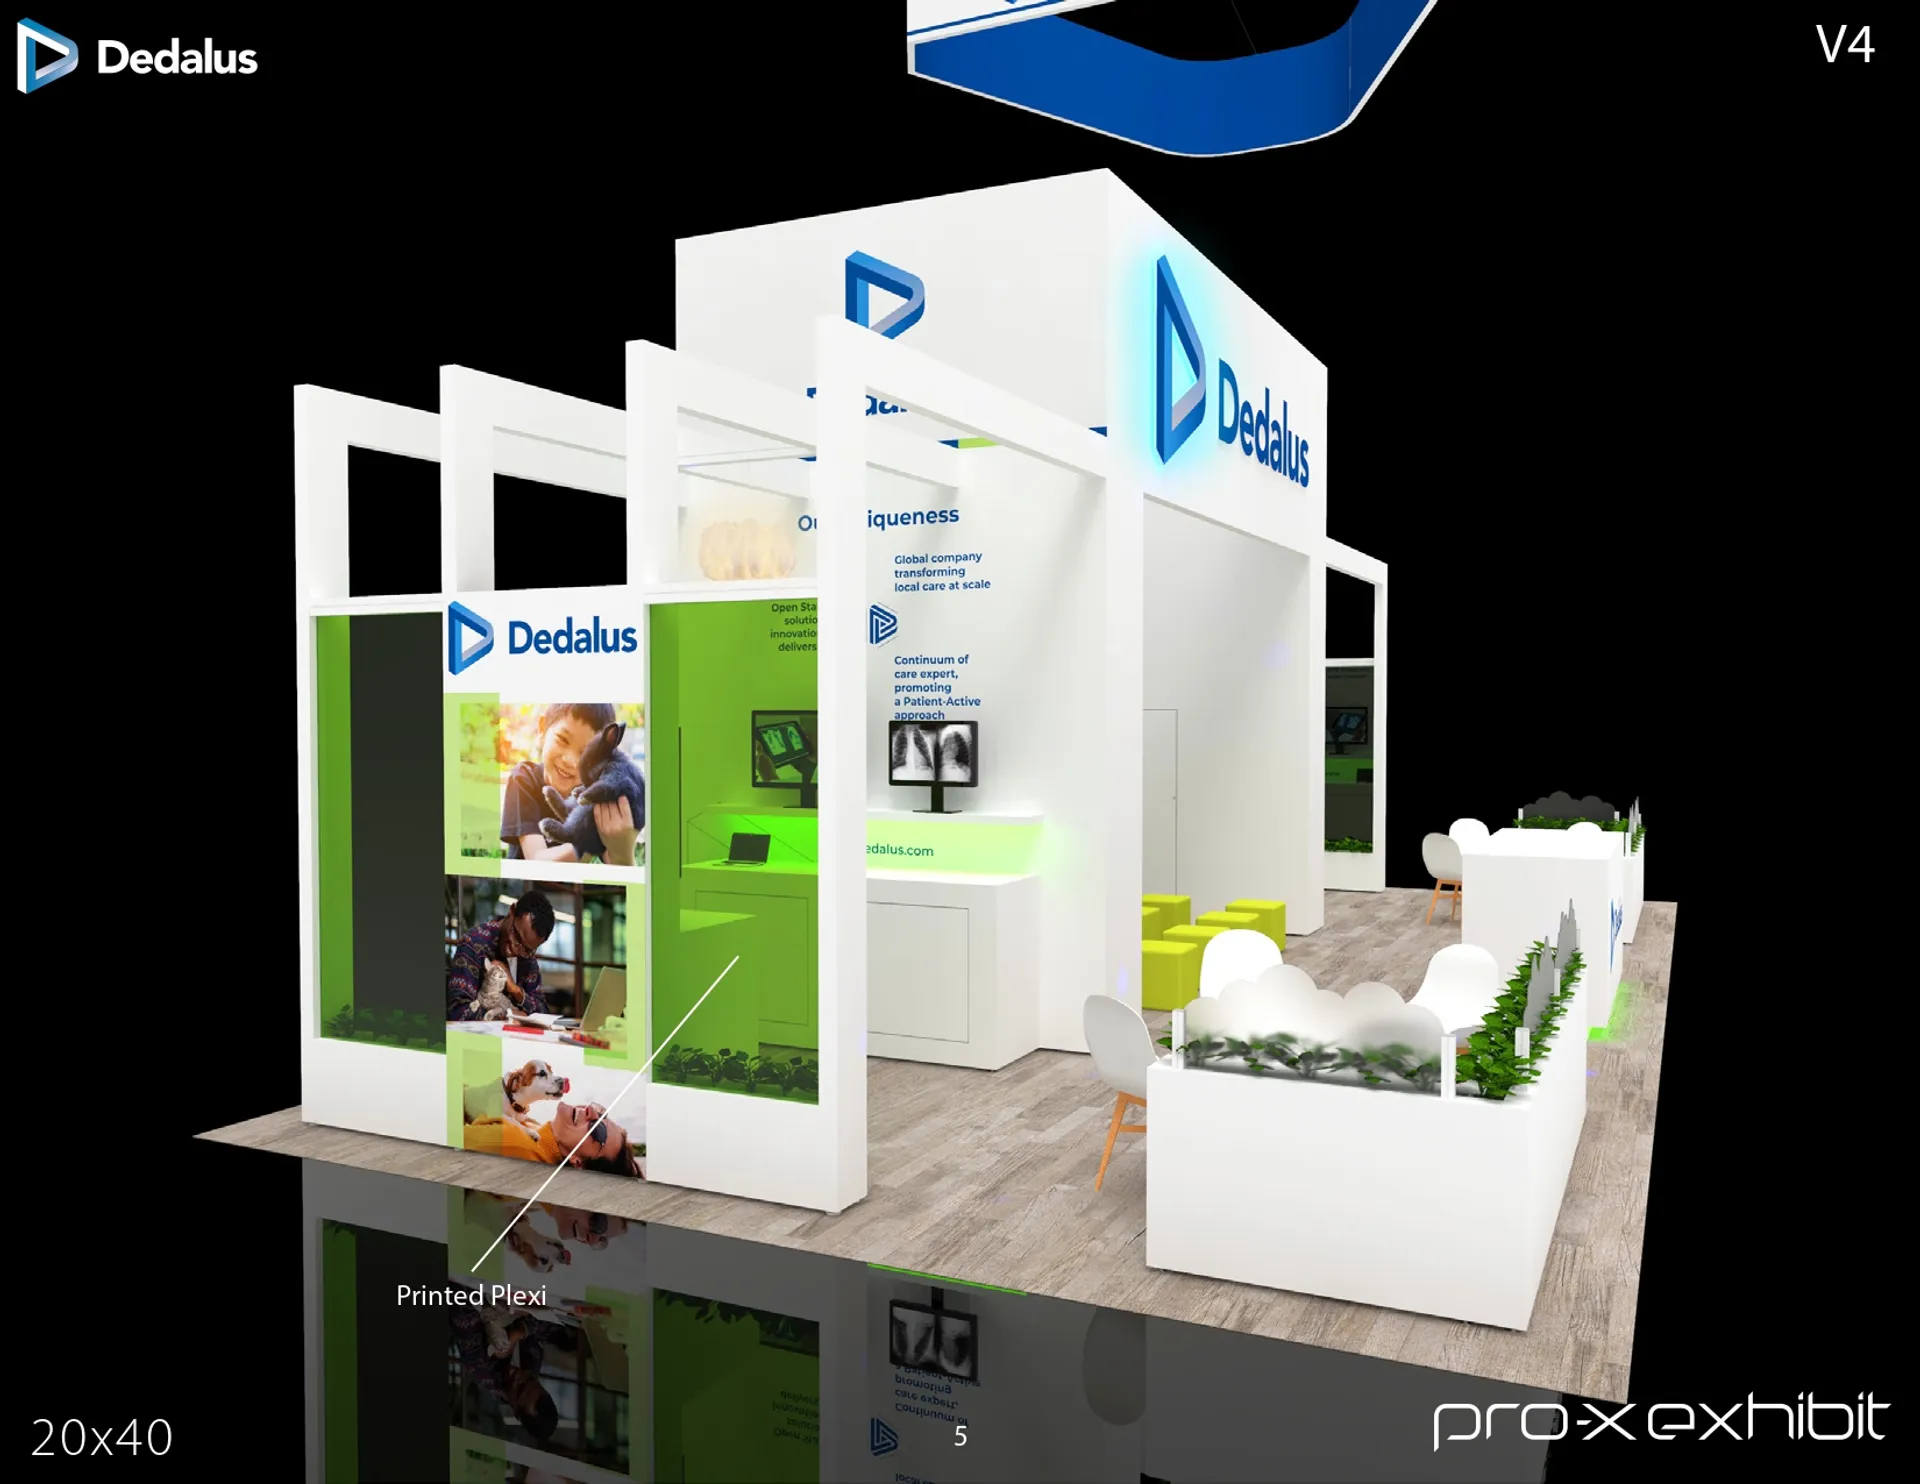 booth-design-projects/Pro-X Exhibits/2024-03-22-20x40-ISLAND-Project-50/DEDALUS_RSNA_20x40_V4-5_page-0001-uiqd13.jpg